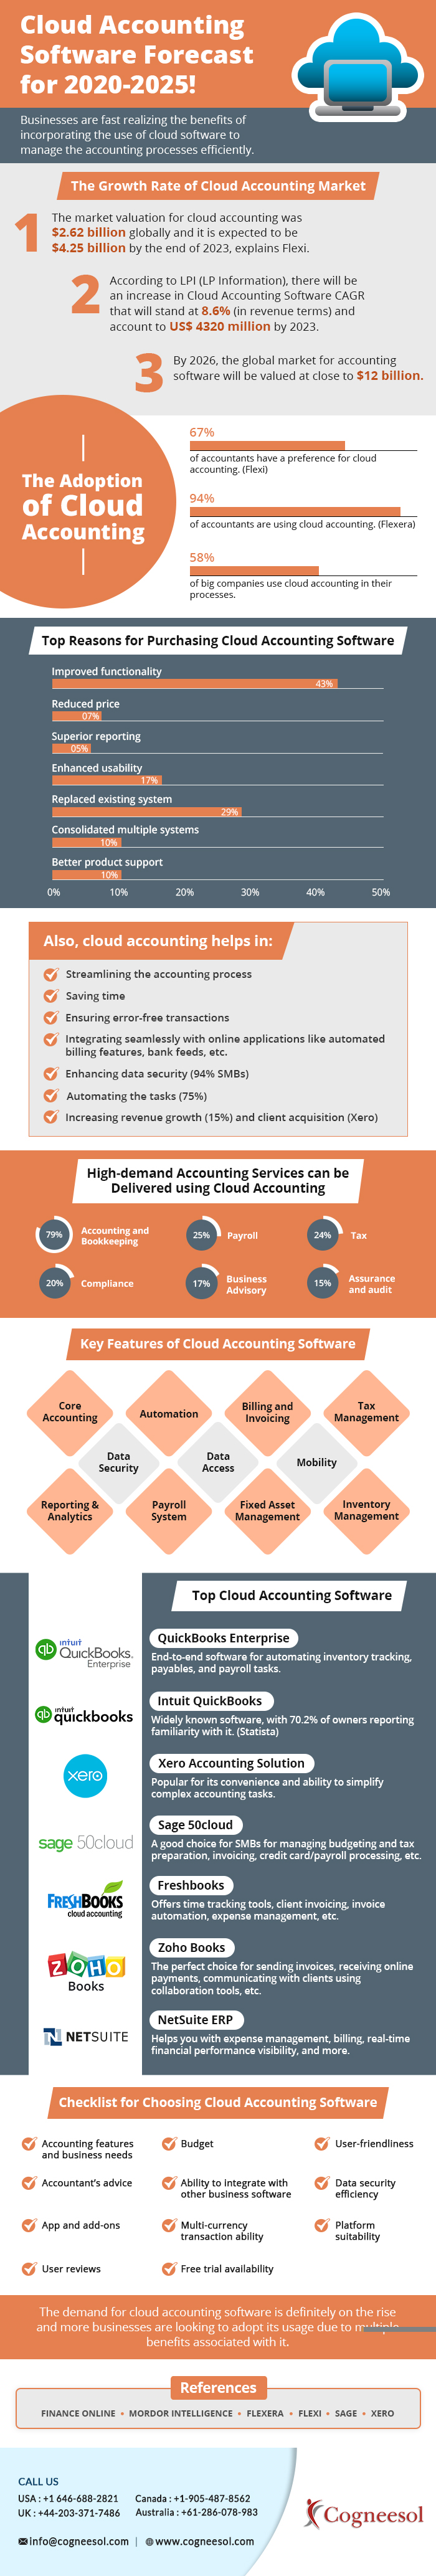 Cloud Accounting Software Forecast for 2020-2025